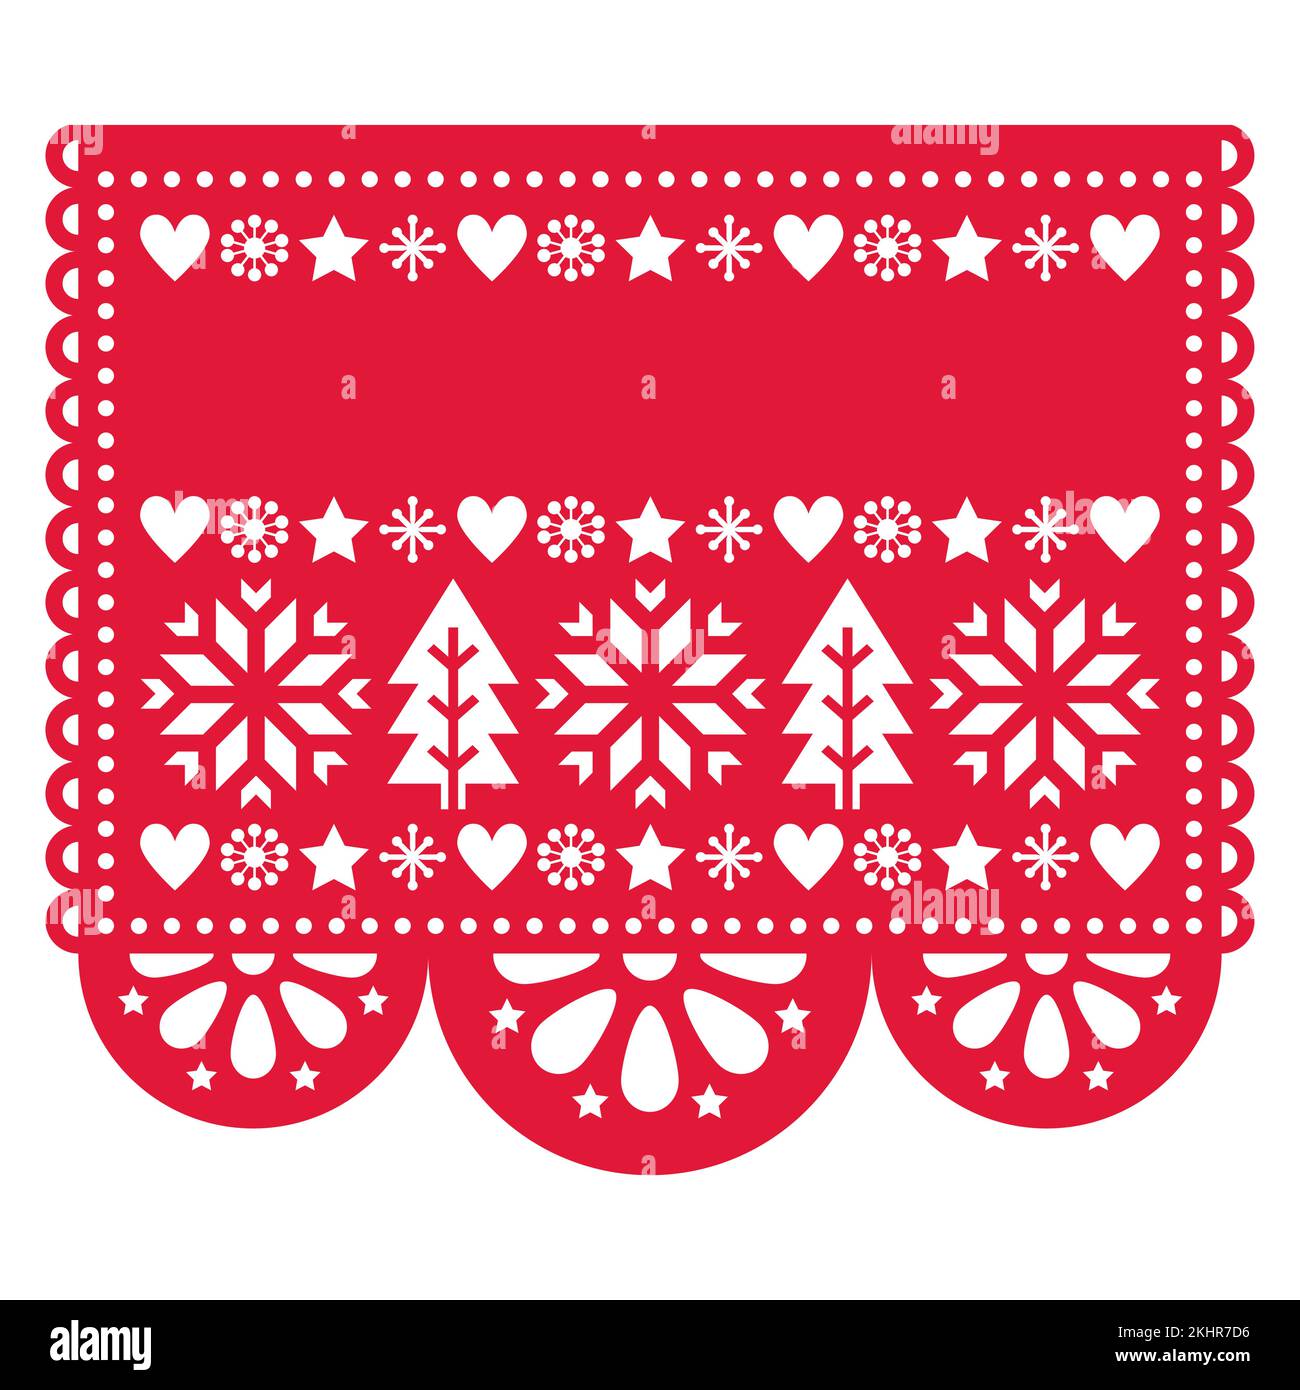 Christmas Papel Picado vector template design with snowflakes, Xmas trees and empty space for greetings text in red on white Stock Vector